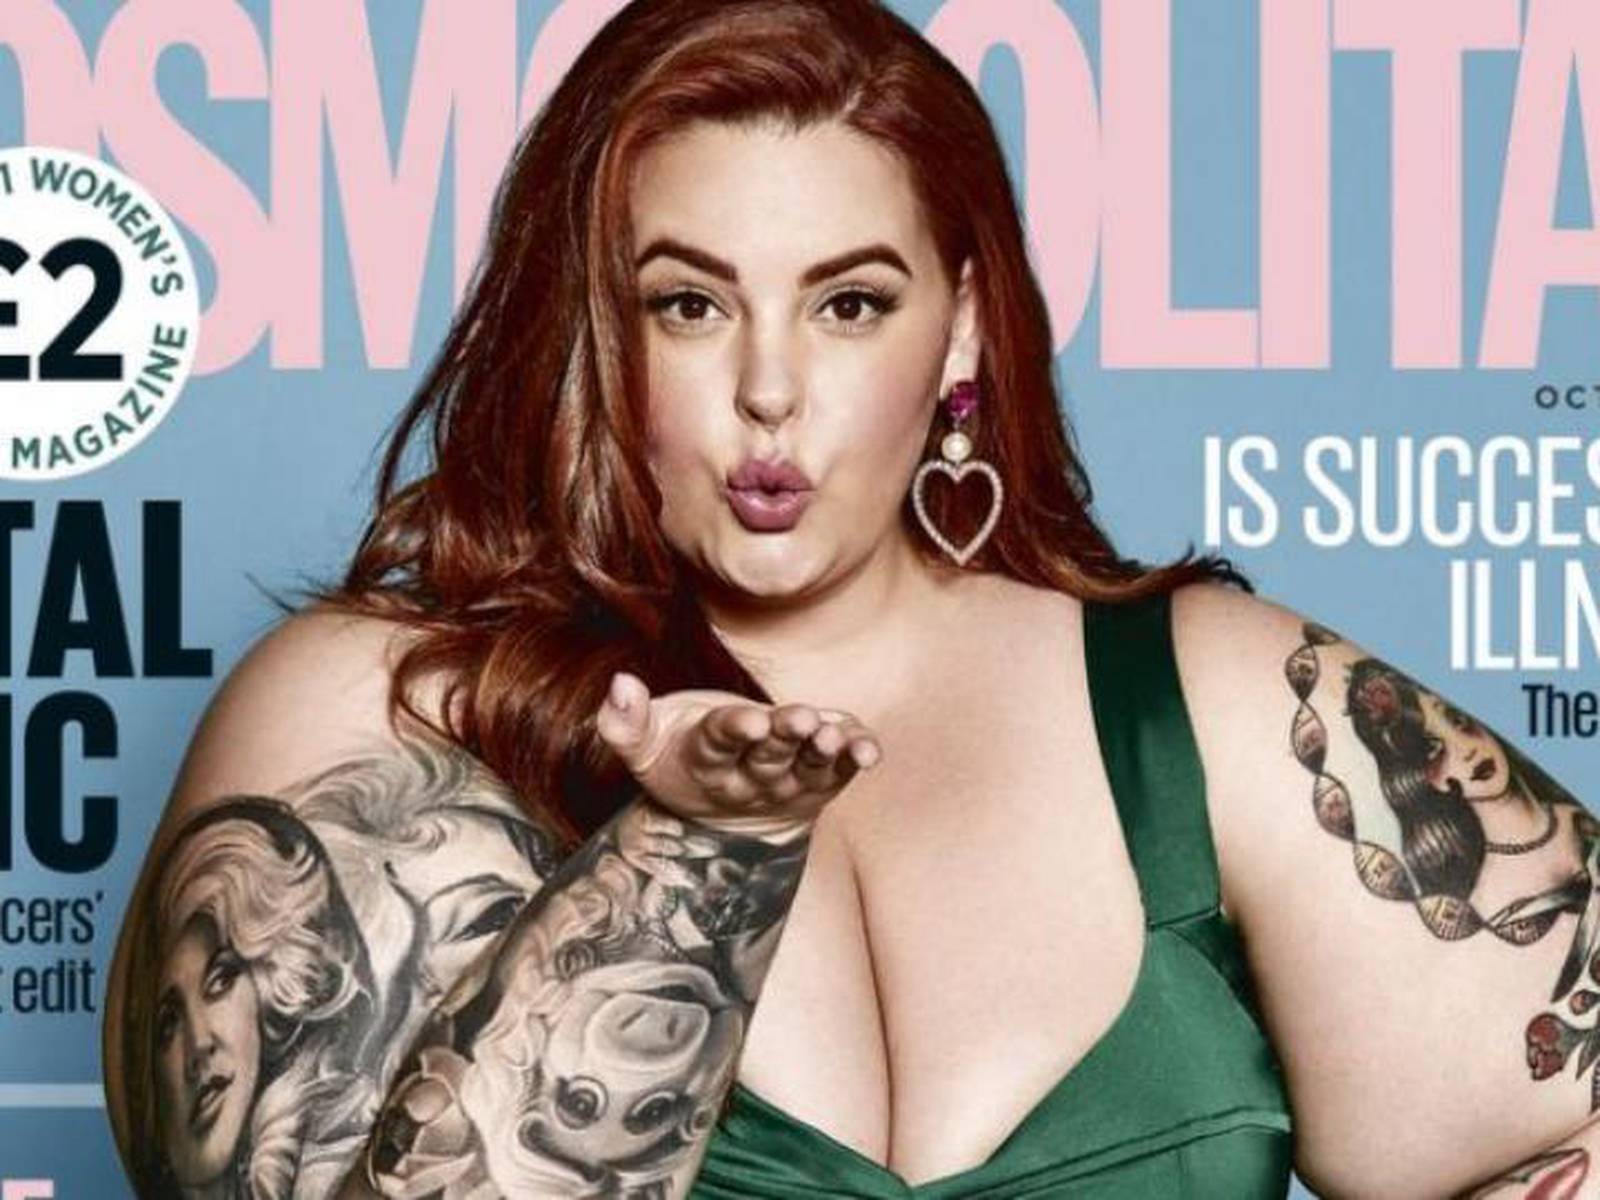 Porn Stars Who Got Fat - Cosmopolitan magazine cover criticised for 'promoting obesity' â€“ The Irish  Times